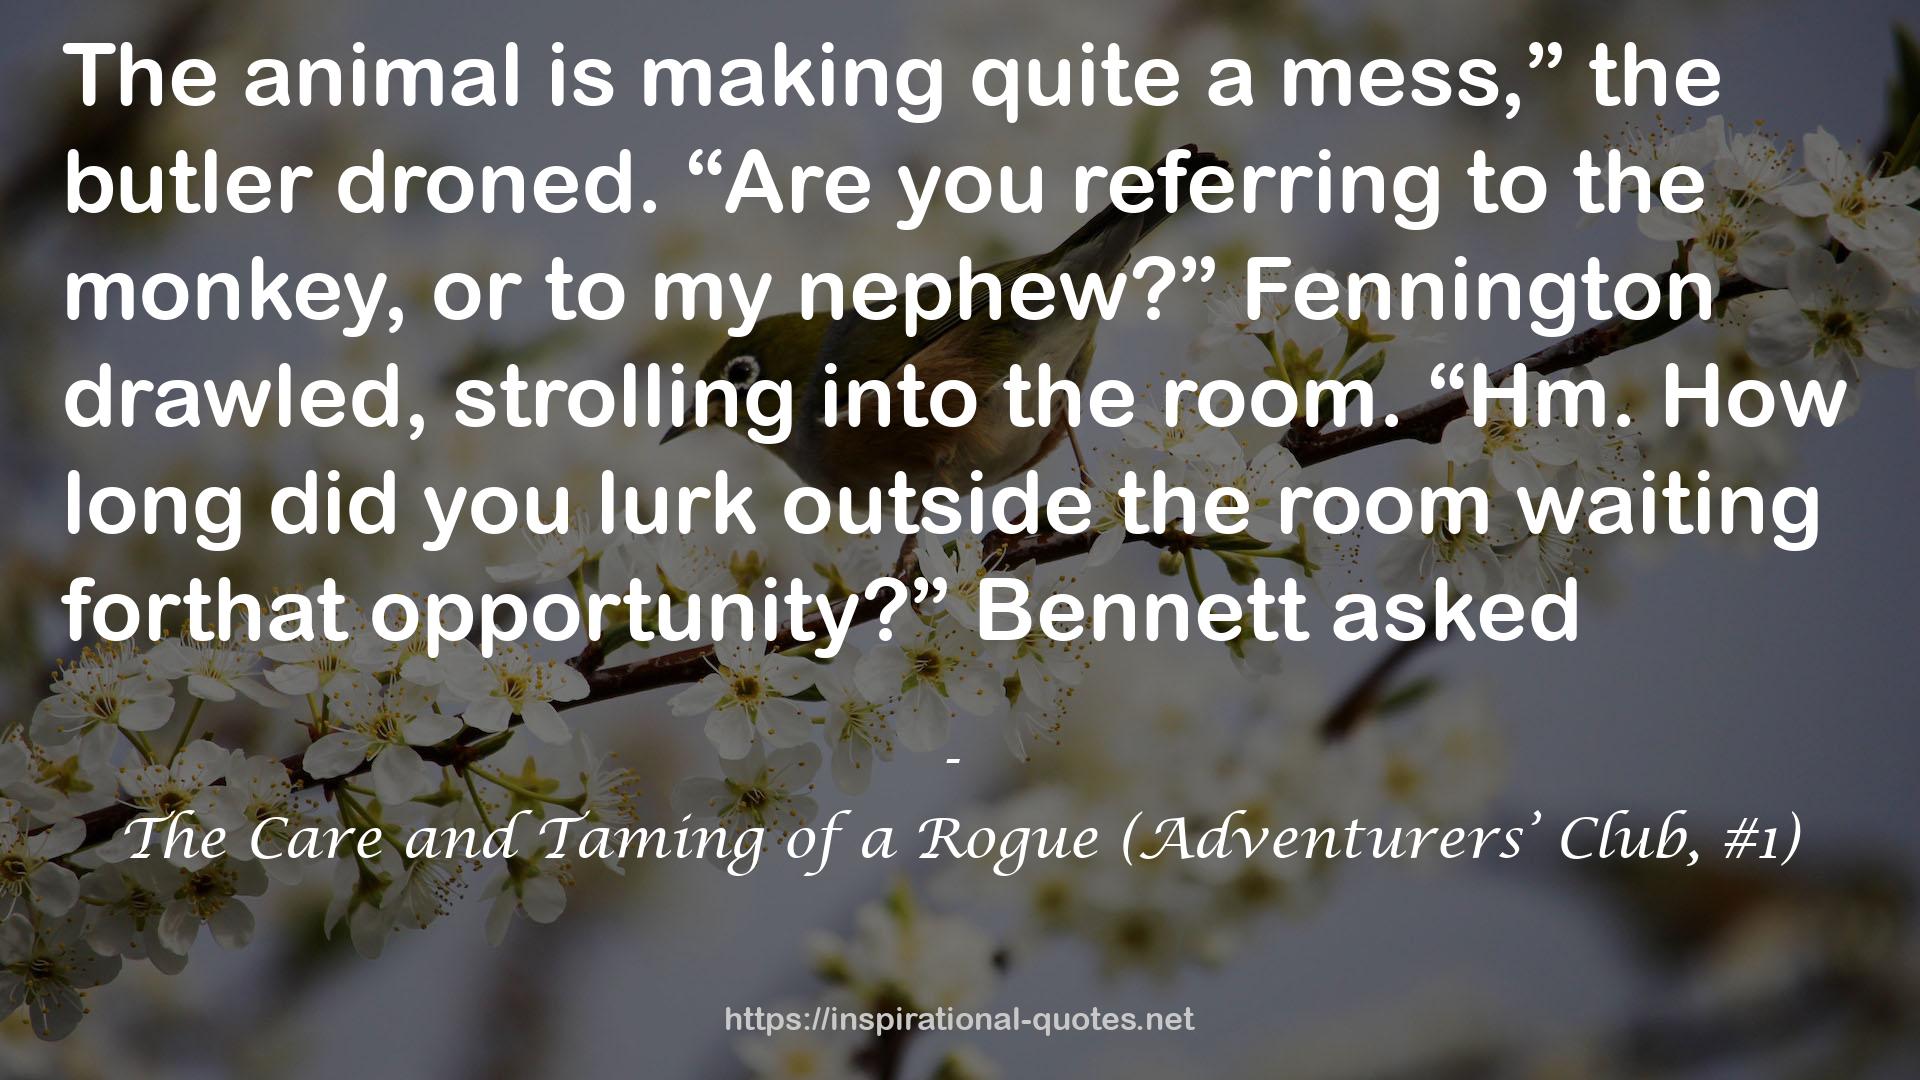 The Care and Taming of a Rogue (Adventurers’ Club, #1) QUOTES